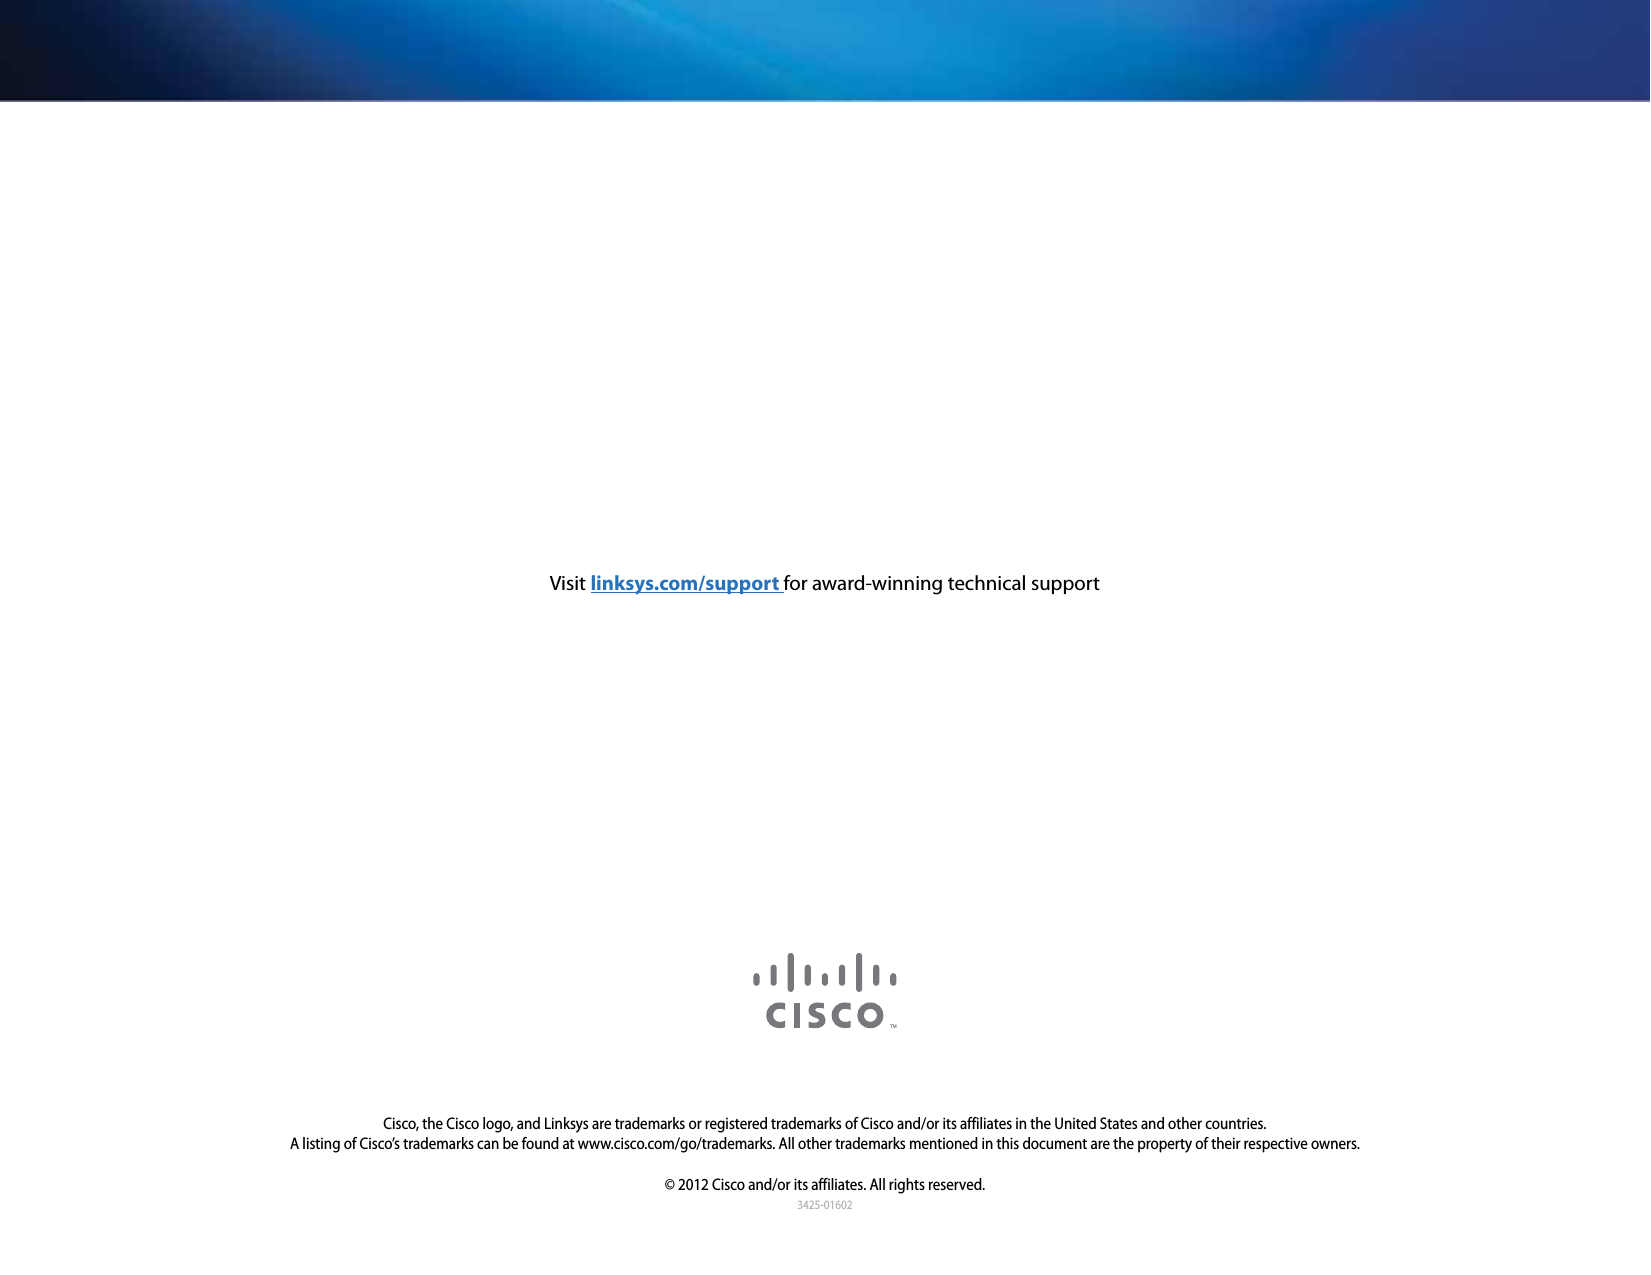 3425-01602Cisco, the Cisco logo, and Linksys are trademarks or registered trademarks of Cisco and/or its affiliates in the United States and other countries. A listing of Cisco’s trademarks can be found at www.cisco.com/go/trademarks. All other trademarks mentioned in this document are the property of their respective owners.© 2012 Cisco and/or its affiliates. All rights reserved.Visit linksys.com/support for award-winning technical support